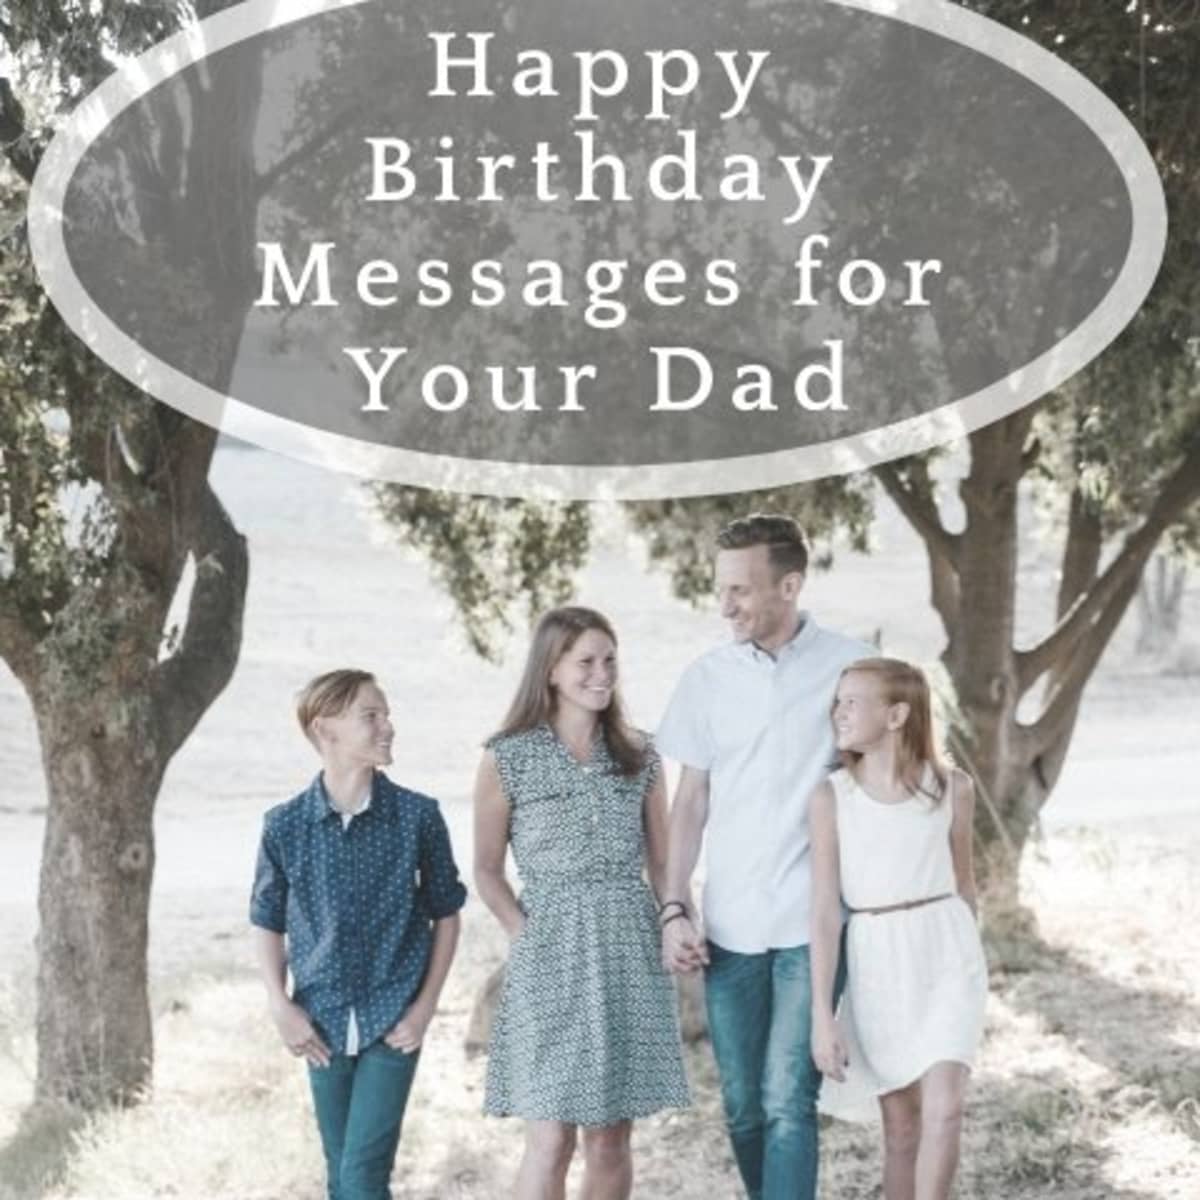 happy birthday wishes for dad messages for your fathers birthday card